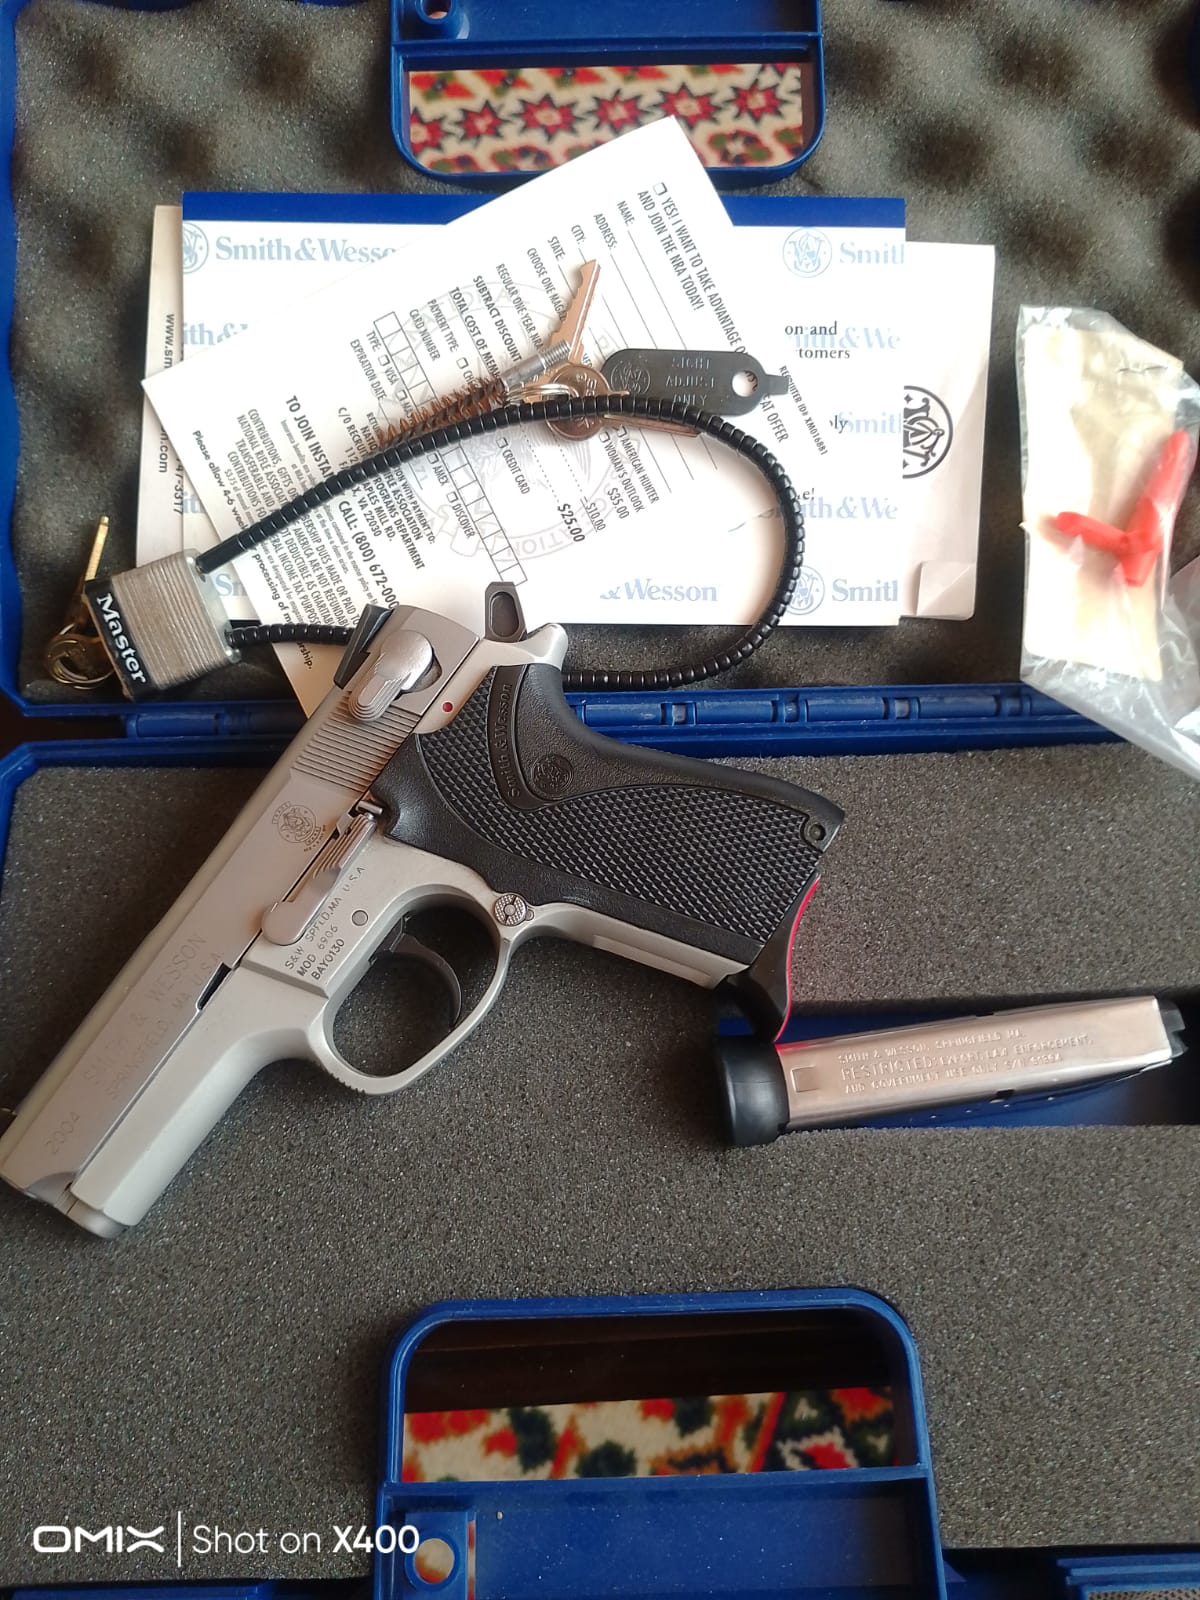 Smith wesson 6906